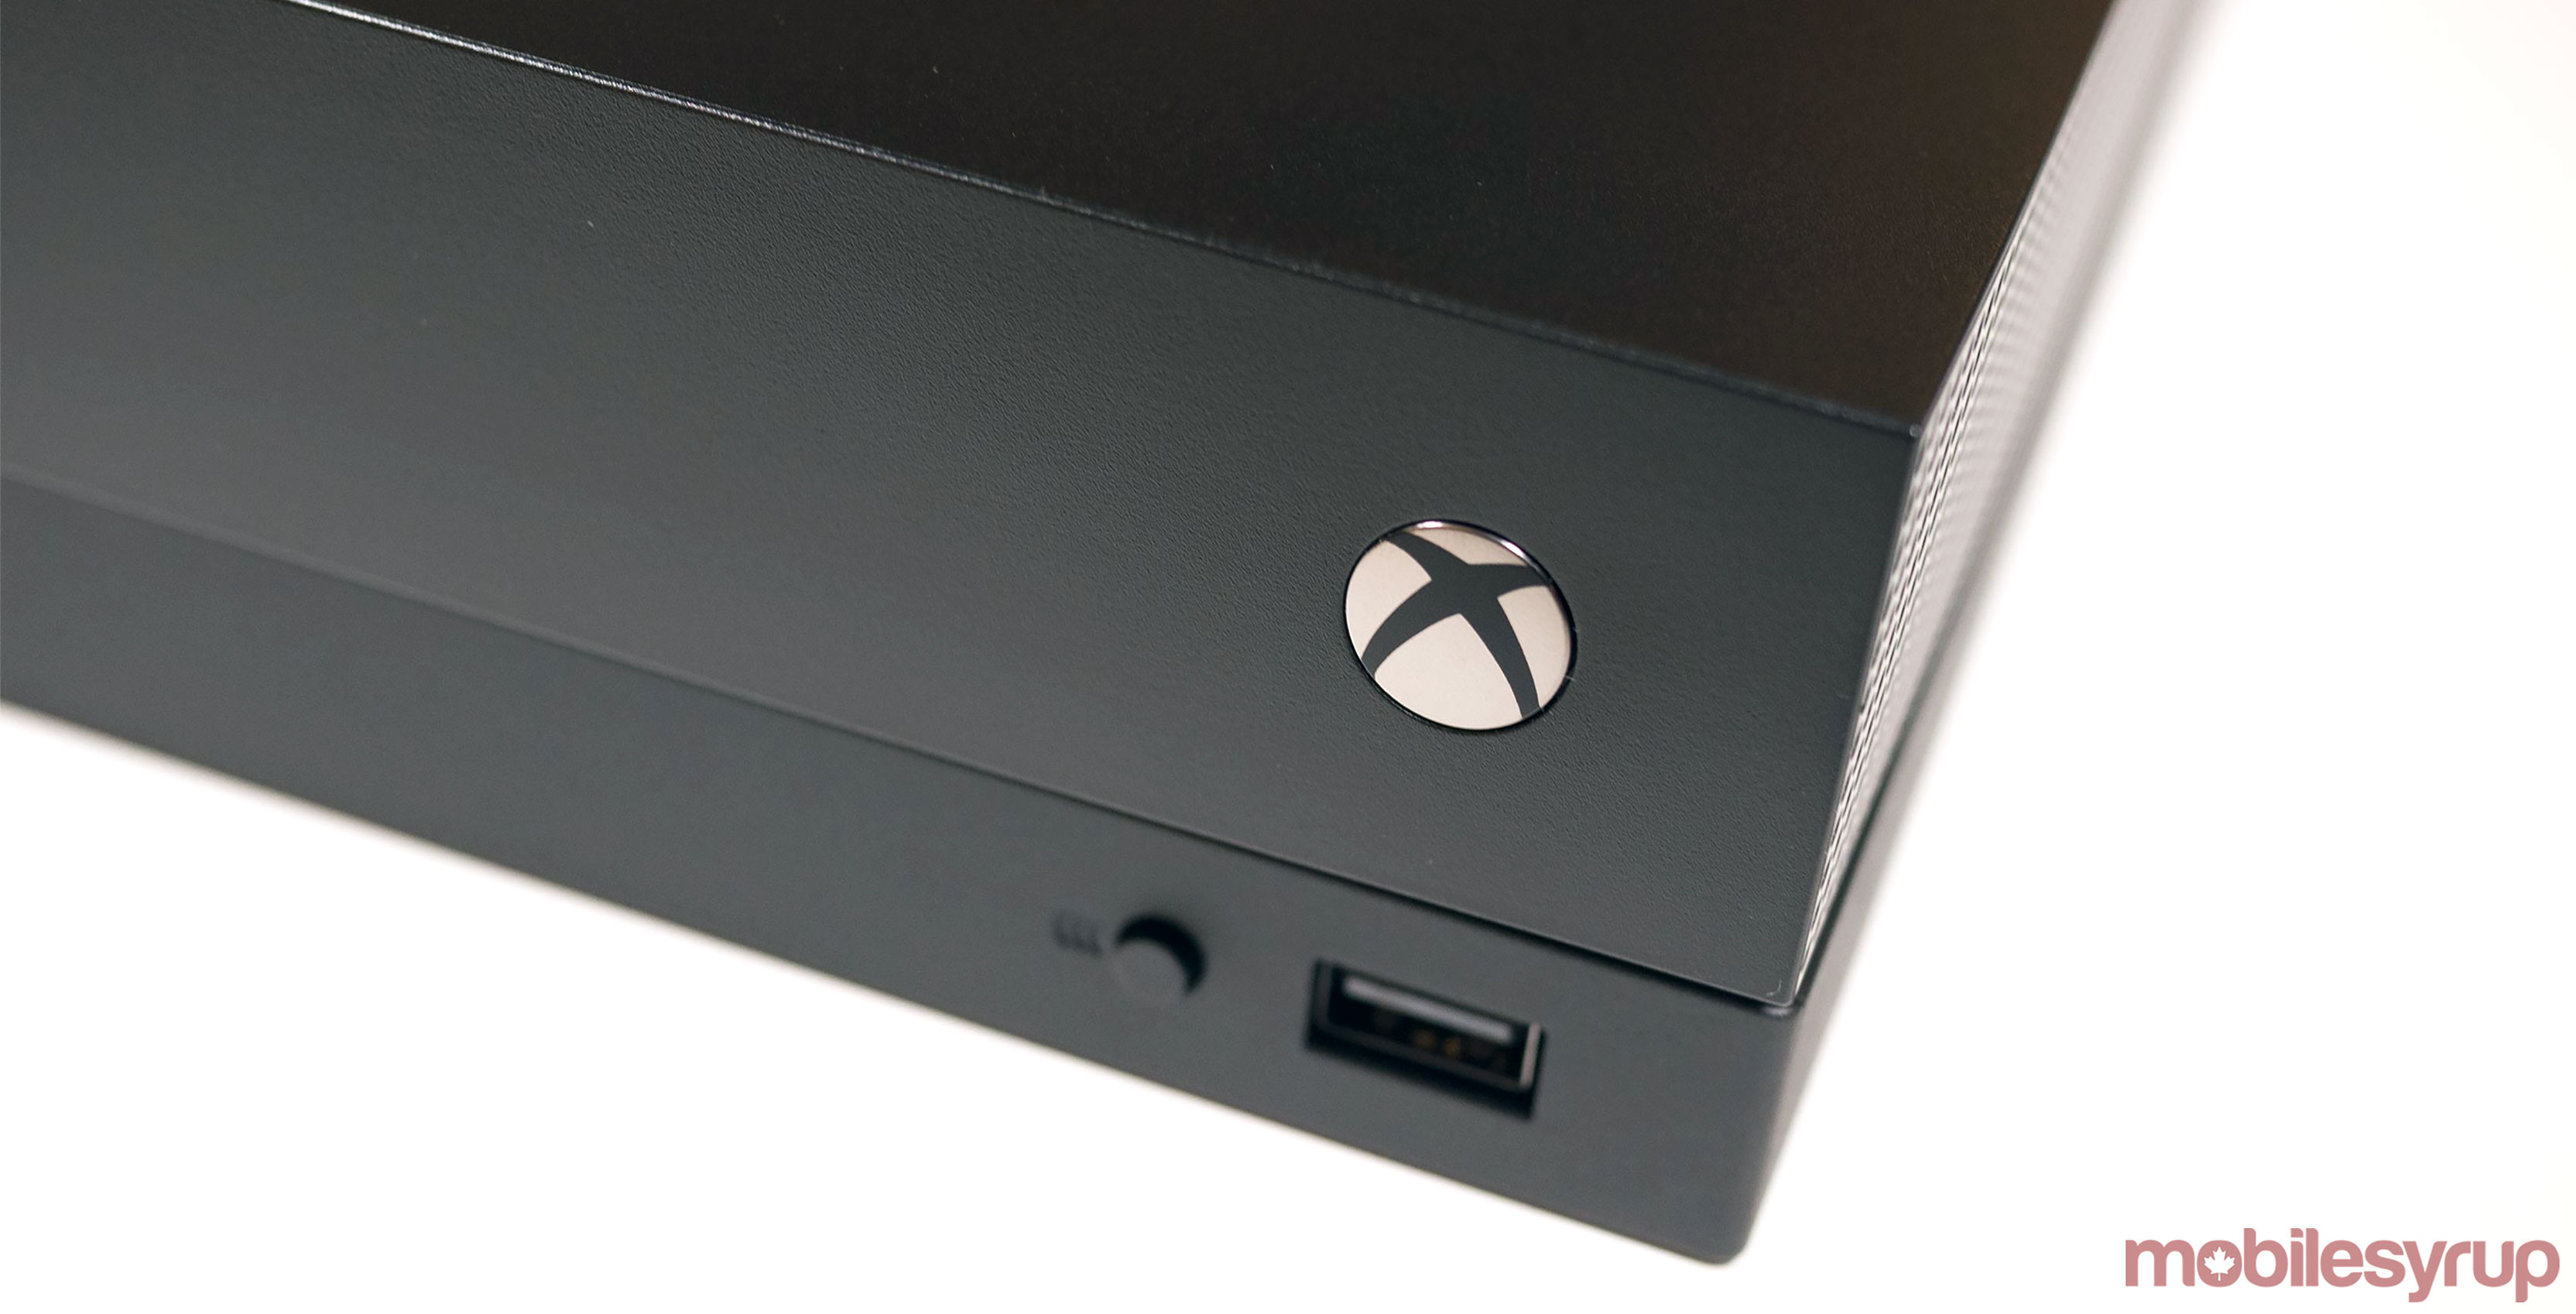 Xbox One console power button